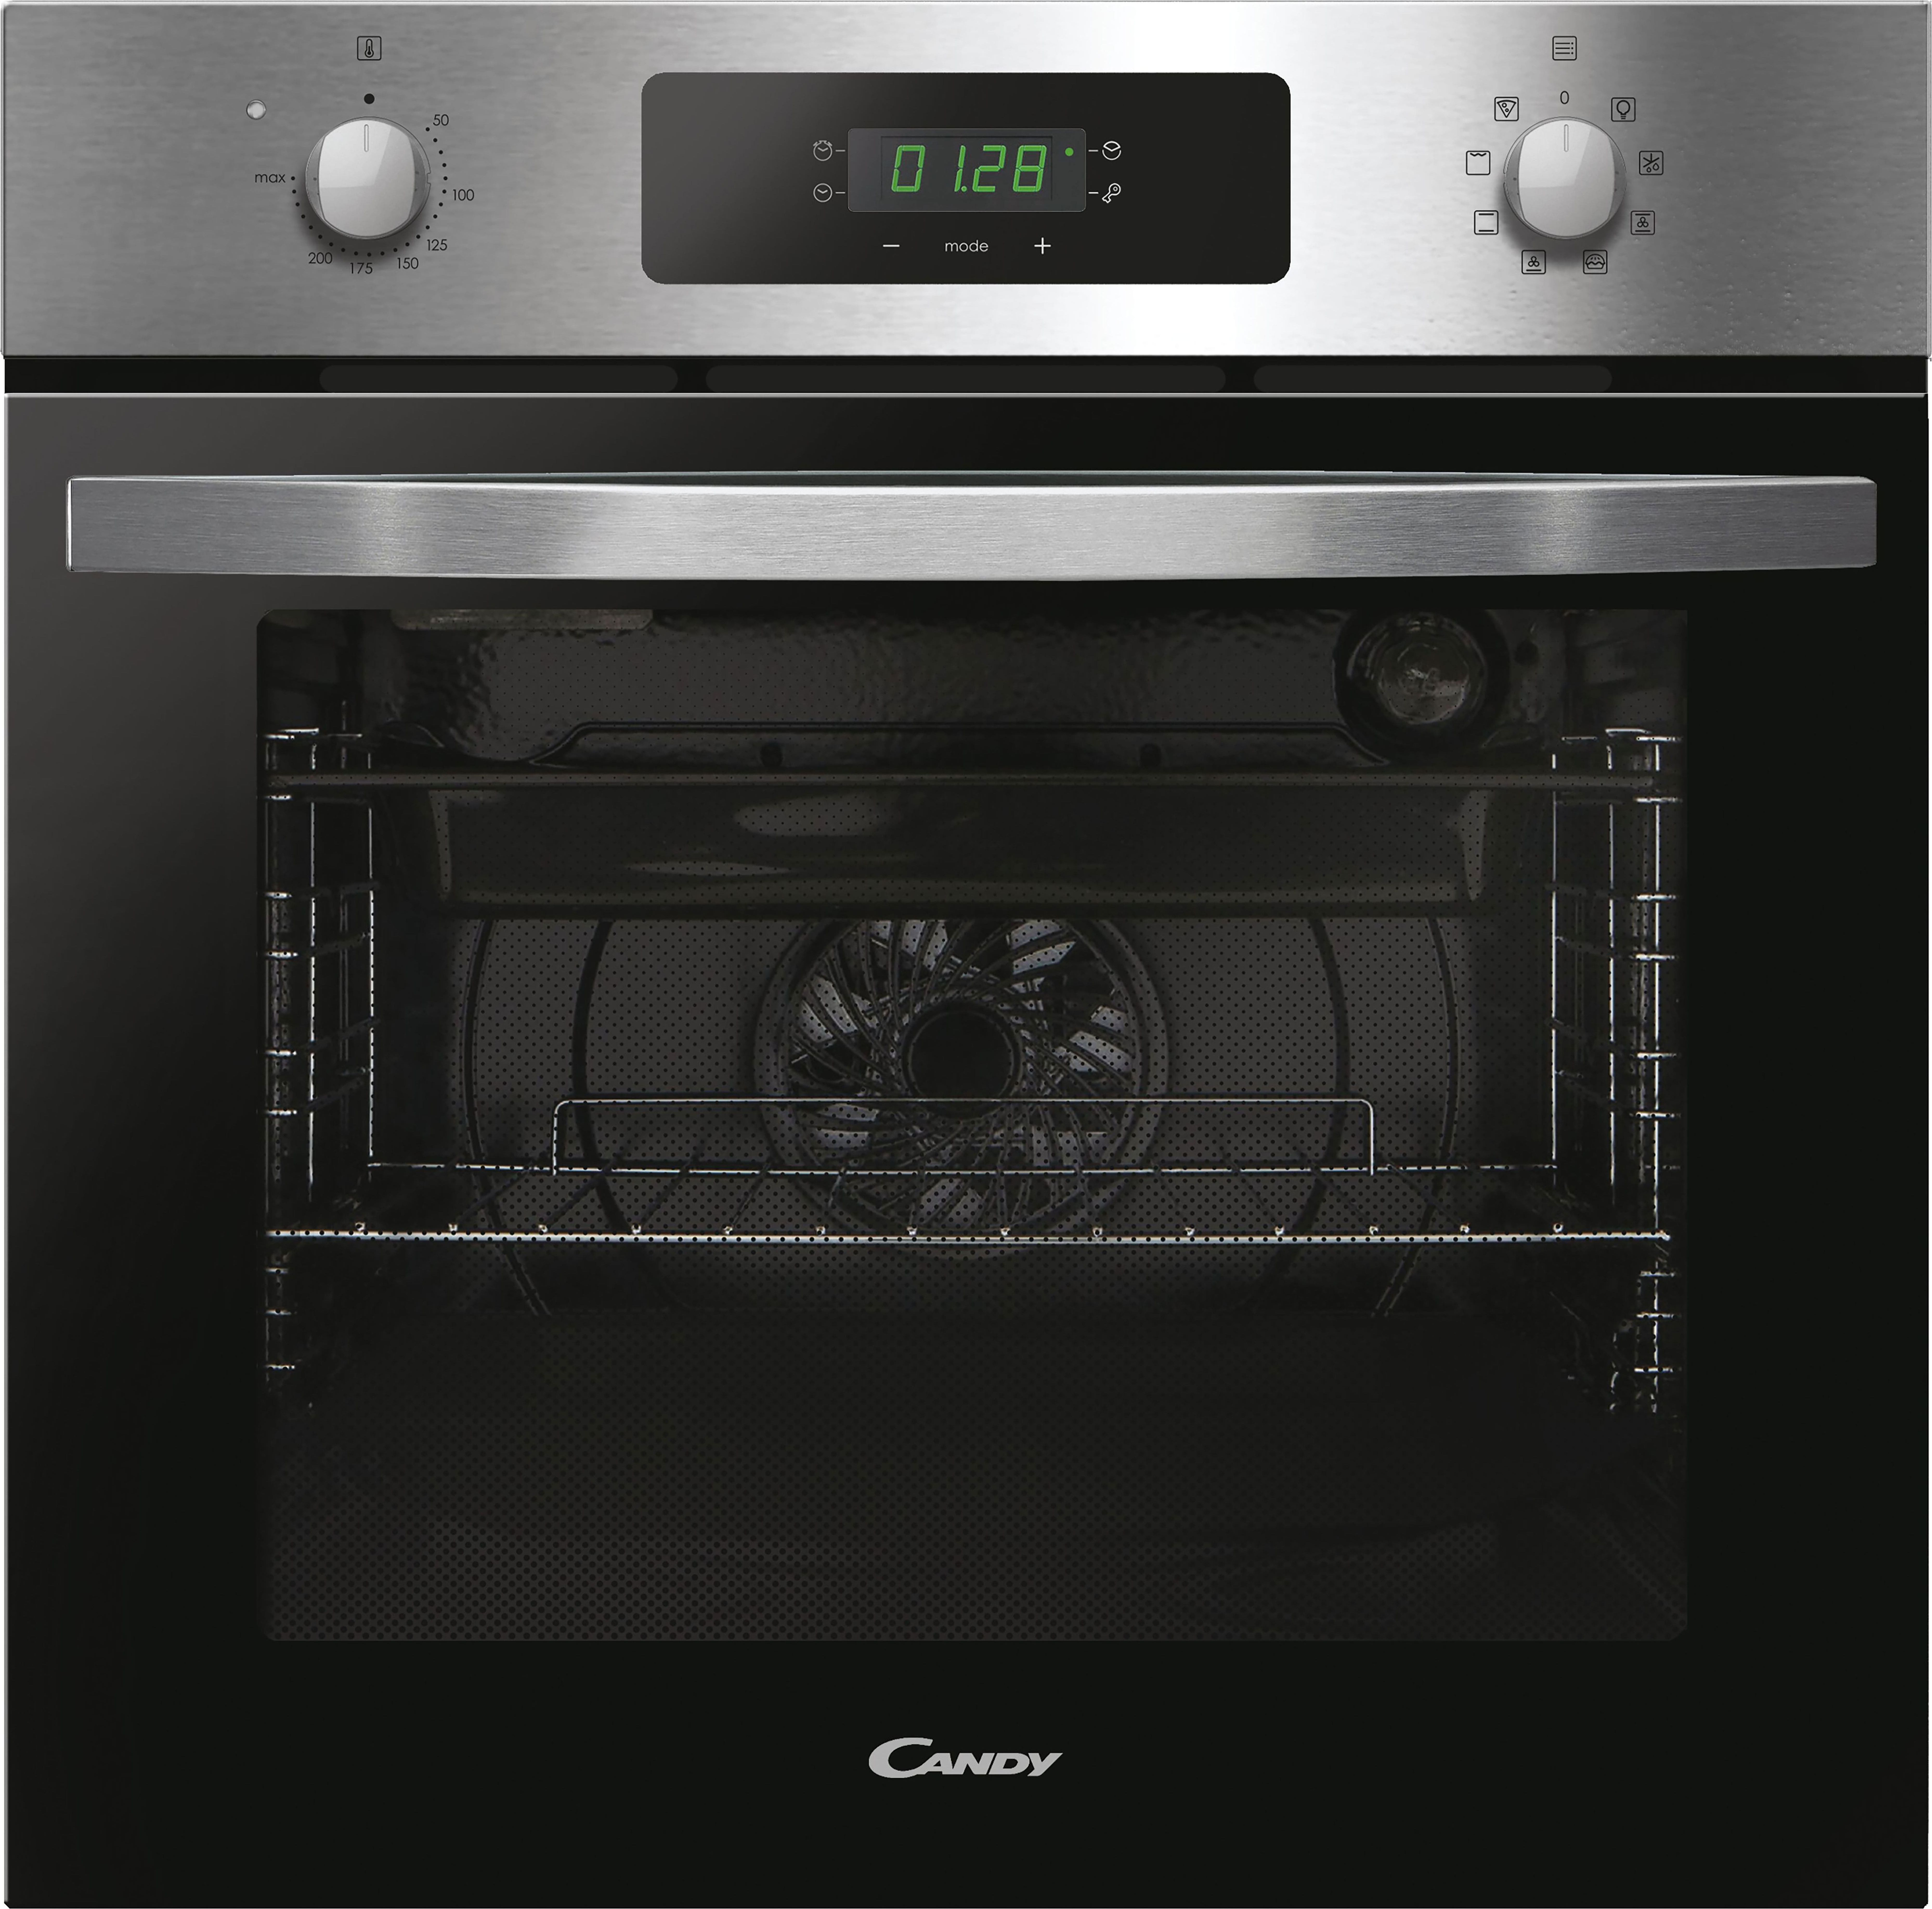 Candy Idea FIDCX615 Built In Electric Single Oven - Stainless Steel - A+ Rated, Stainless Steel